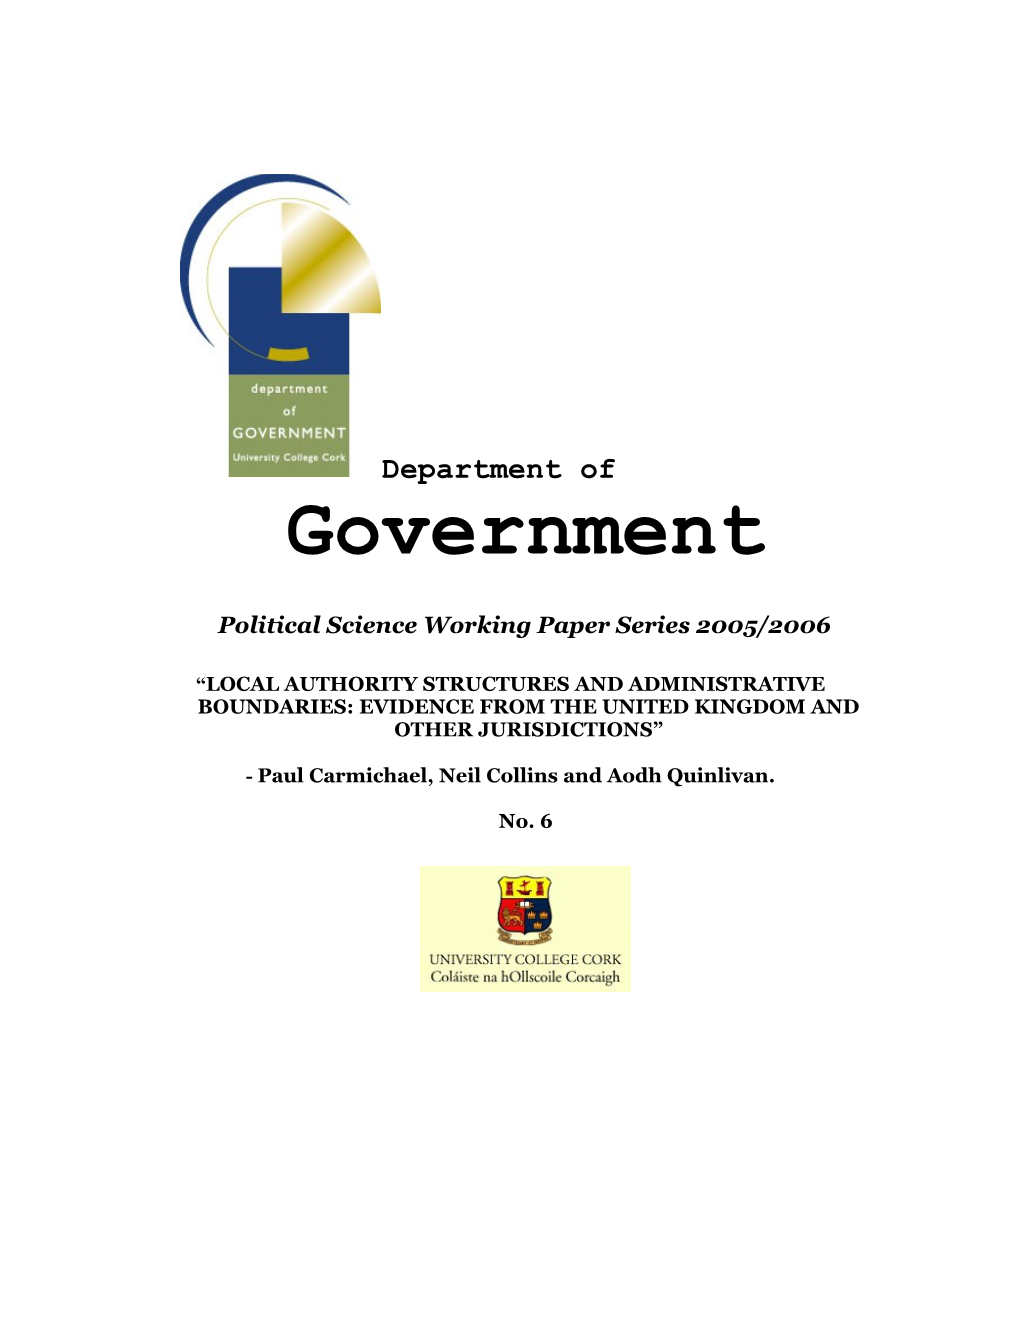 Political Science Working Paper Series 2005/2006